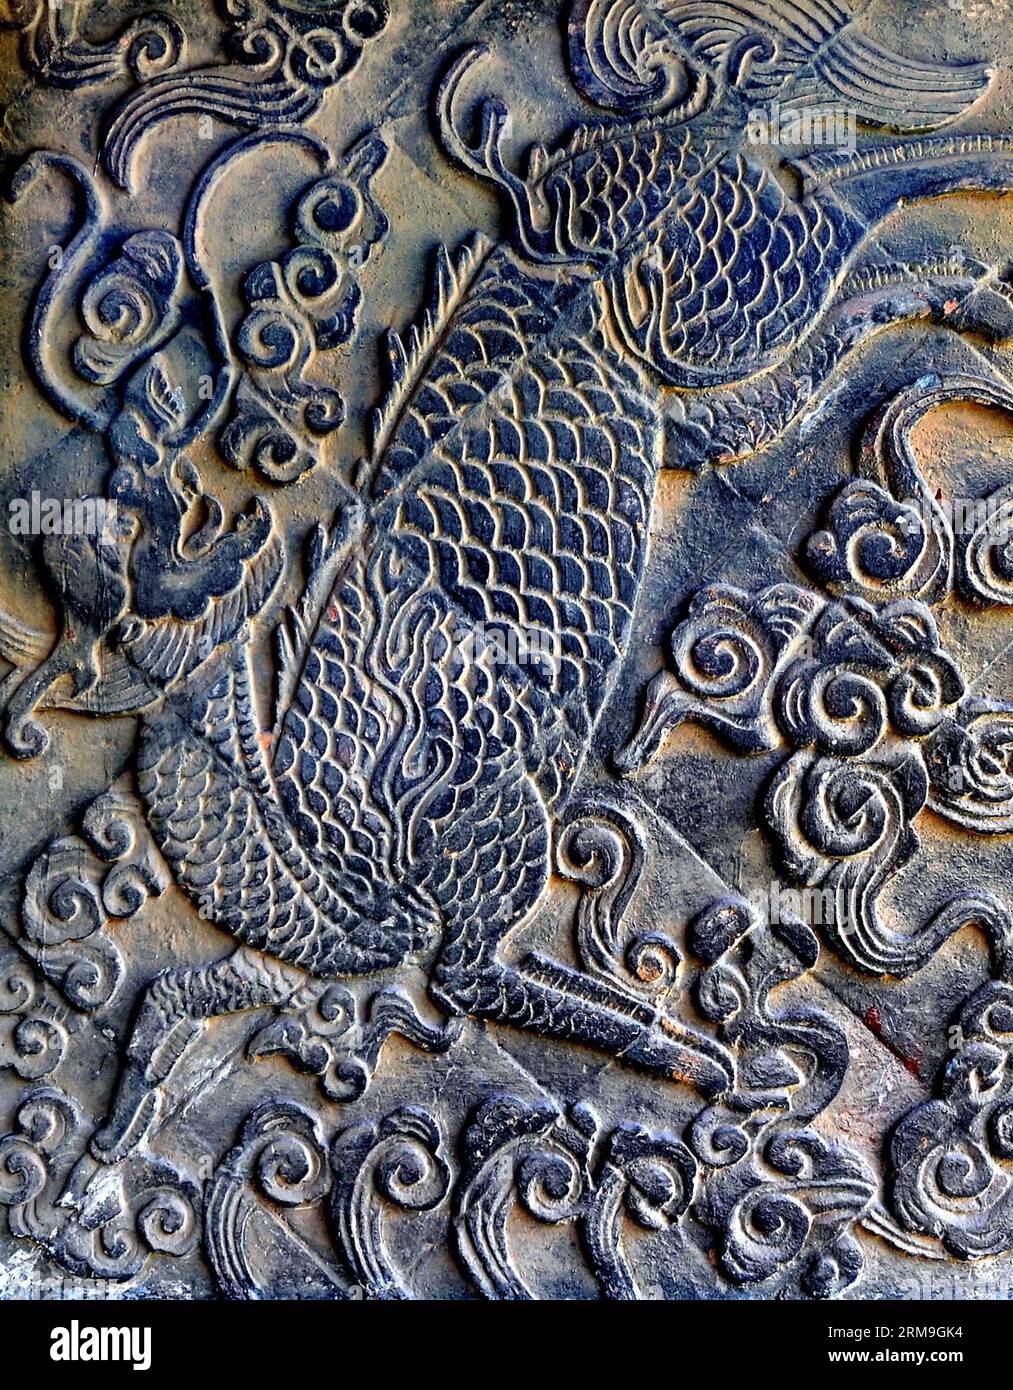 (140523) -- ZHENGZHOU, May 23, 2014 (Xinhua) -- Photo taken on May 23, 2010 shows the stone relief of a Qilin, an auspicious beast in Chinese mythology, at the Anguo Temple in Licun Township of Shanxian County, central China s Henan Province. A large number of architectural sculptures have been preserved in historical sites of Henan, which is one of the cradles of the Chinese civilization. Many of the sculptures, created from stones, bricks, or wood, were used as building parts of residences, shrines and memorial archways, among other architecture types. Underlining both the mood and the detai Stock Photo